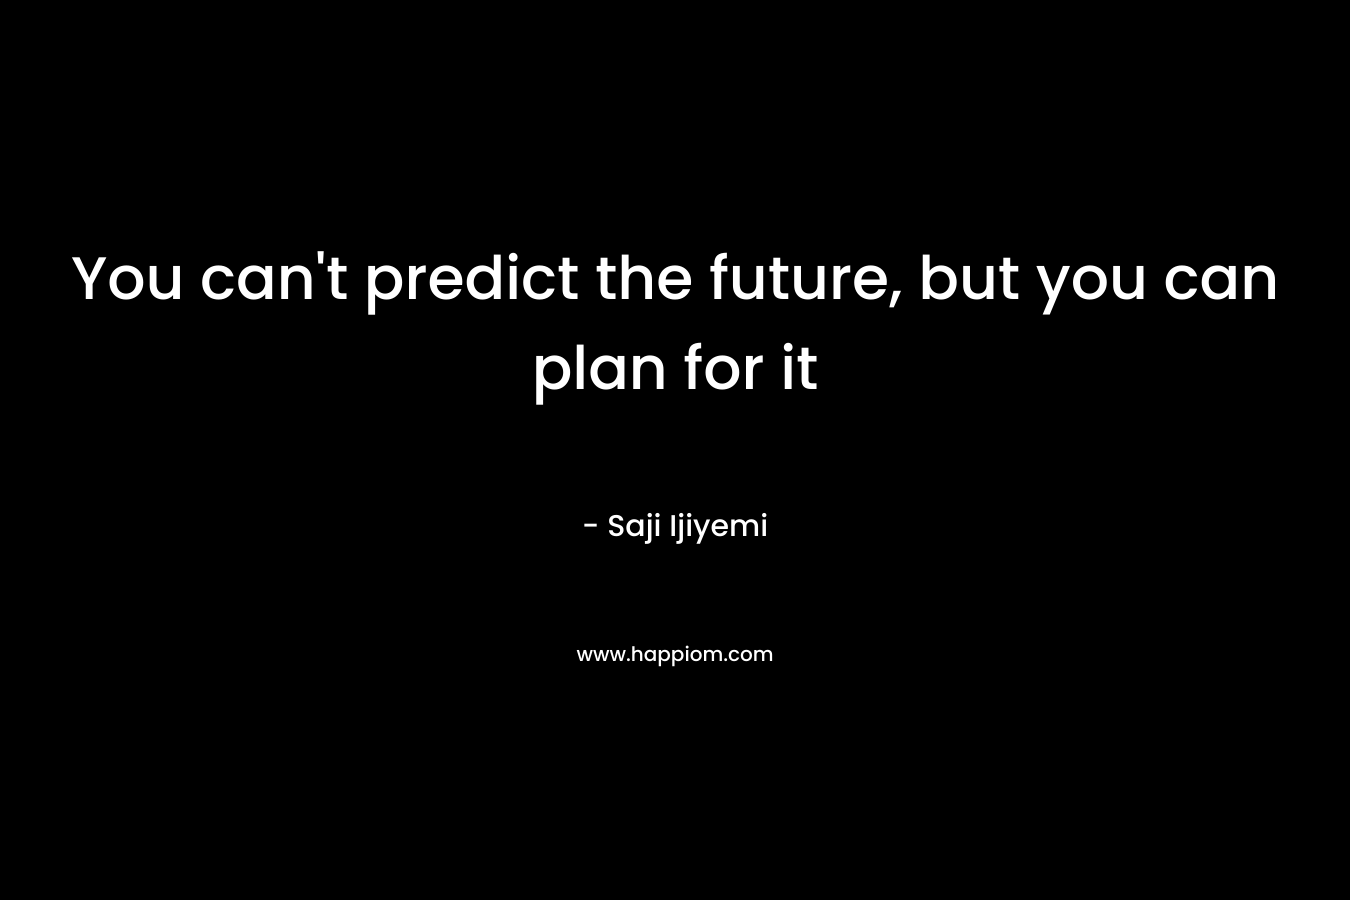 You can't predict the future, but you can plan for it